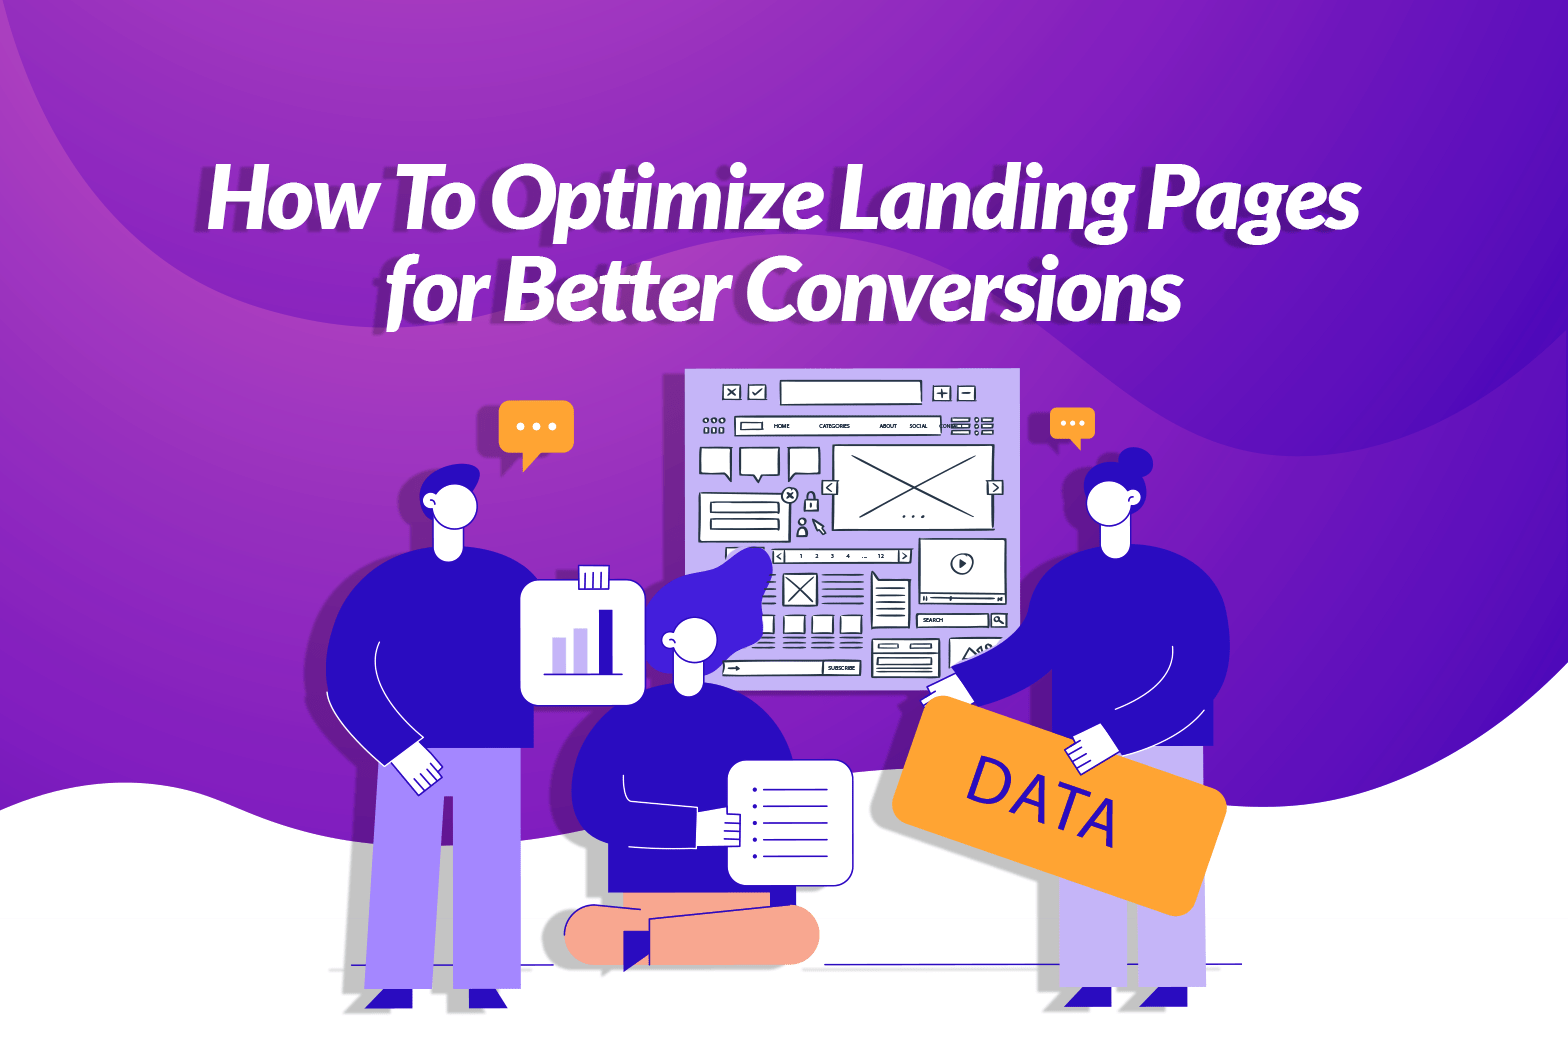 How To Optimize Landing Pages for Better Conversions